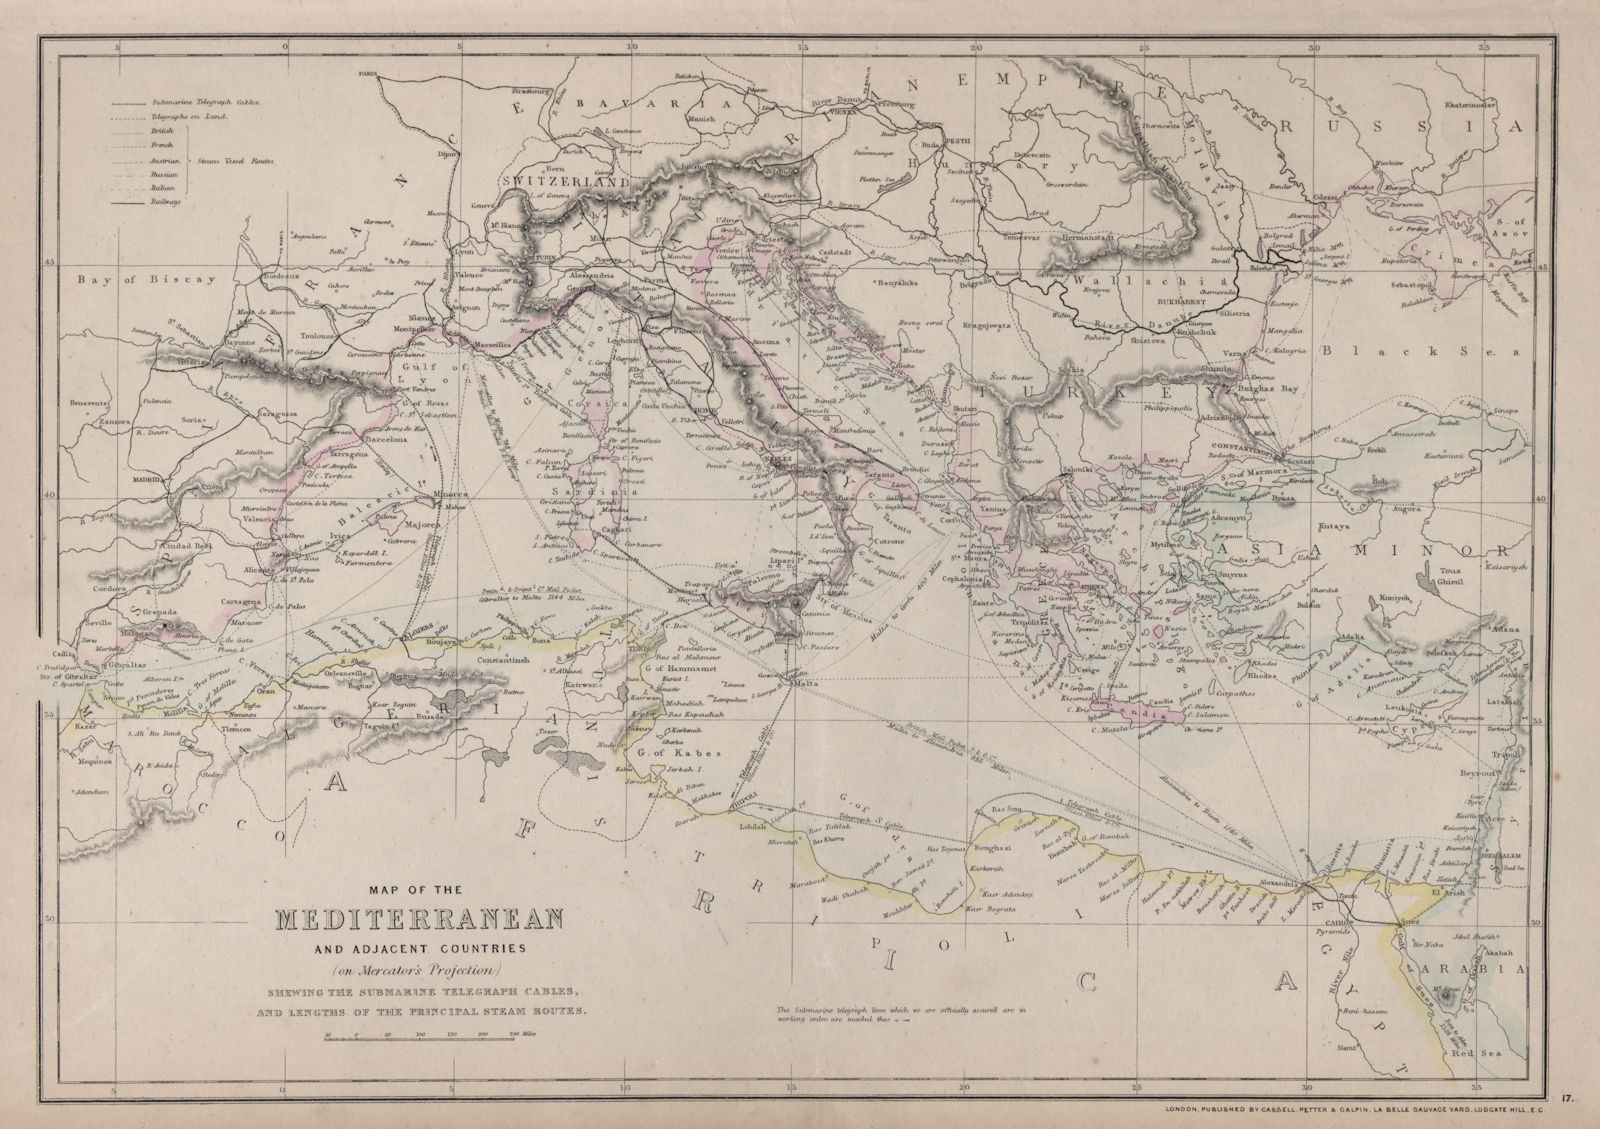 MEDITERRANEAN SEA. Submarine telegraph cables. steamship routes. LOWRY 1868 map